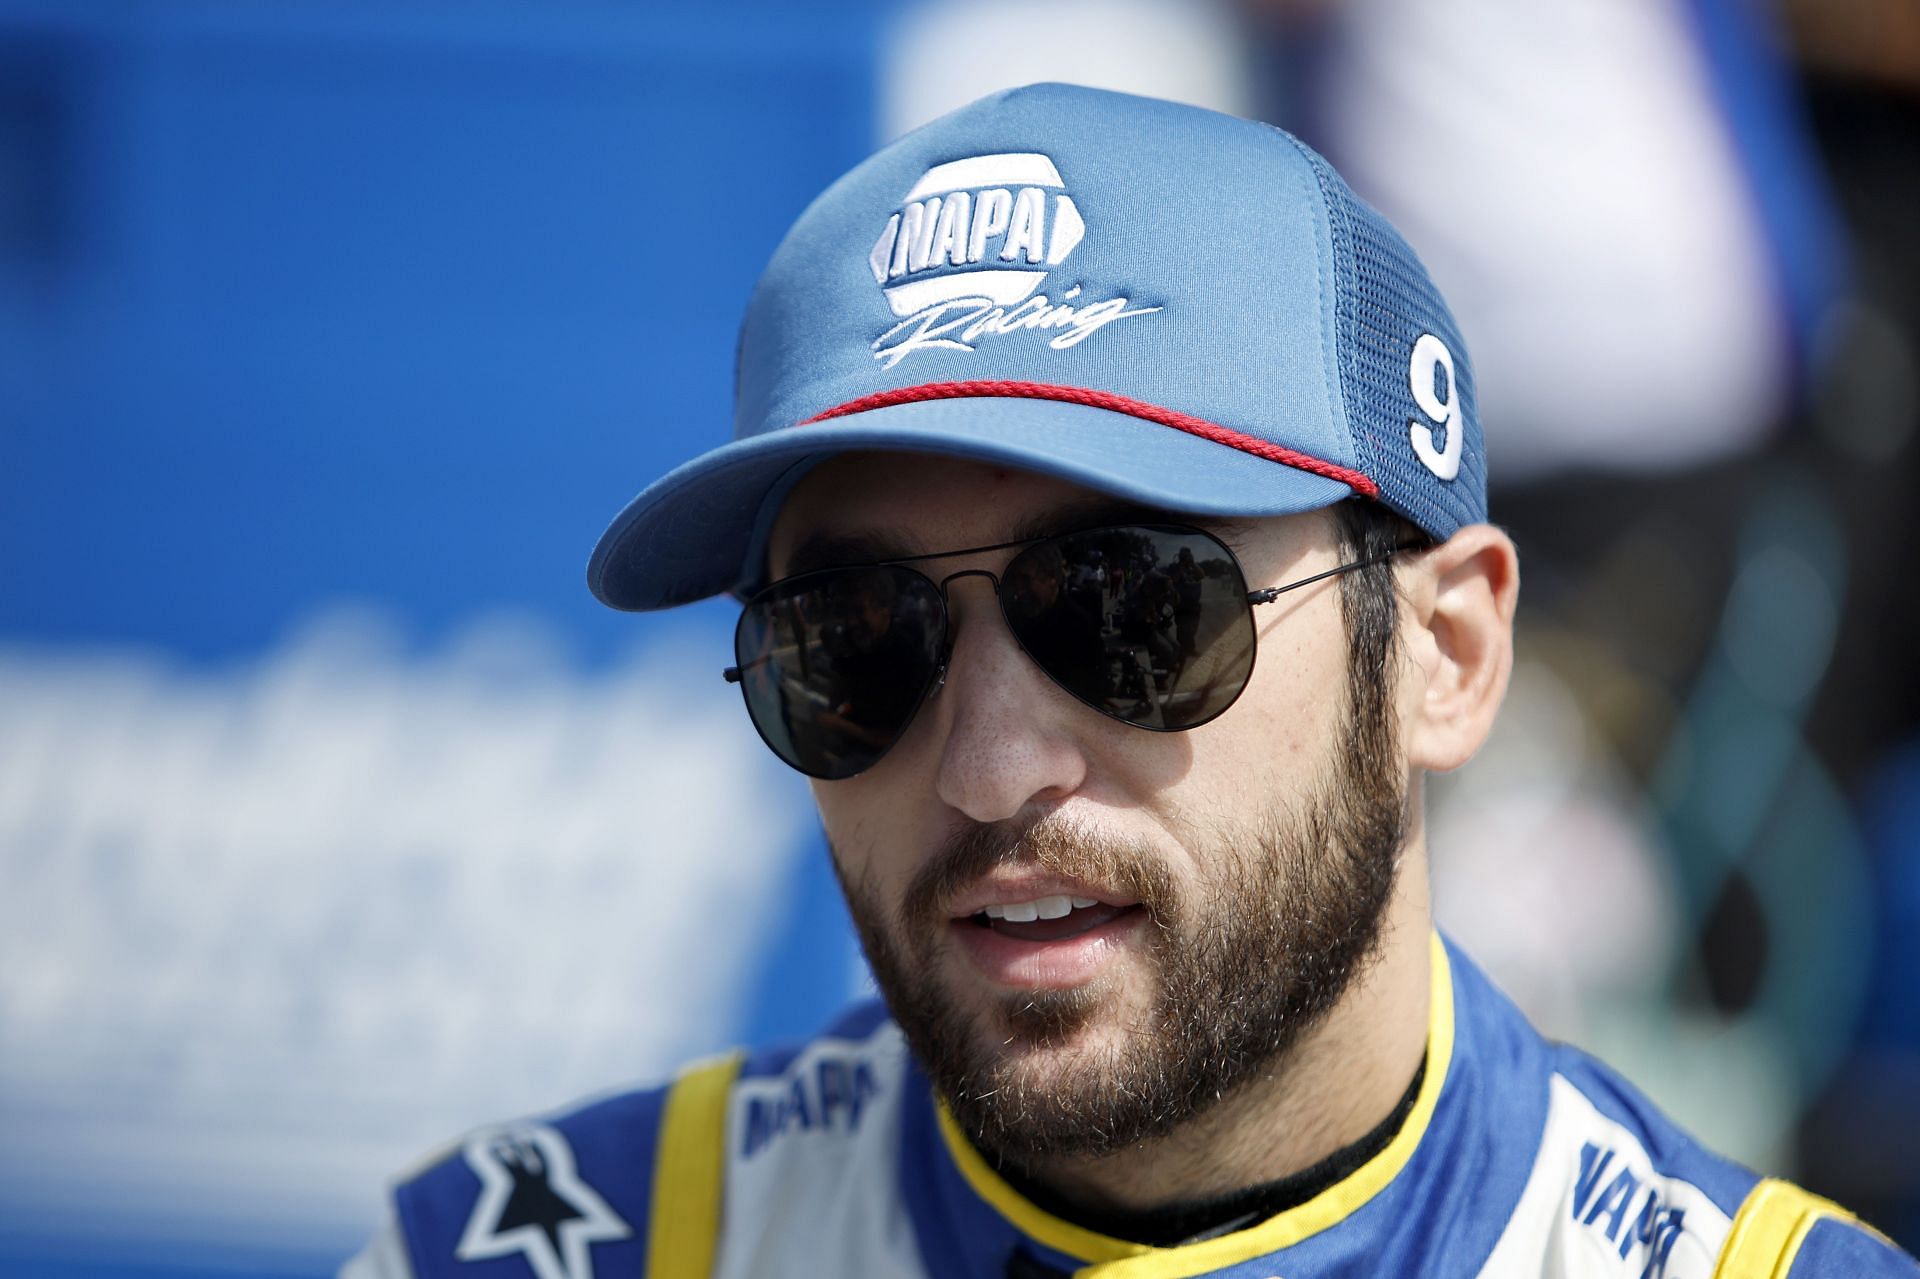 Chase Elliott waits on the grid during practice for the 2022 NASCAR Cup Series Kwik Trip 250 at Road America in Elkhart Lake, Wisconsin. (Photo by Sean Gardner/Getty Images)